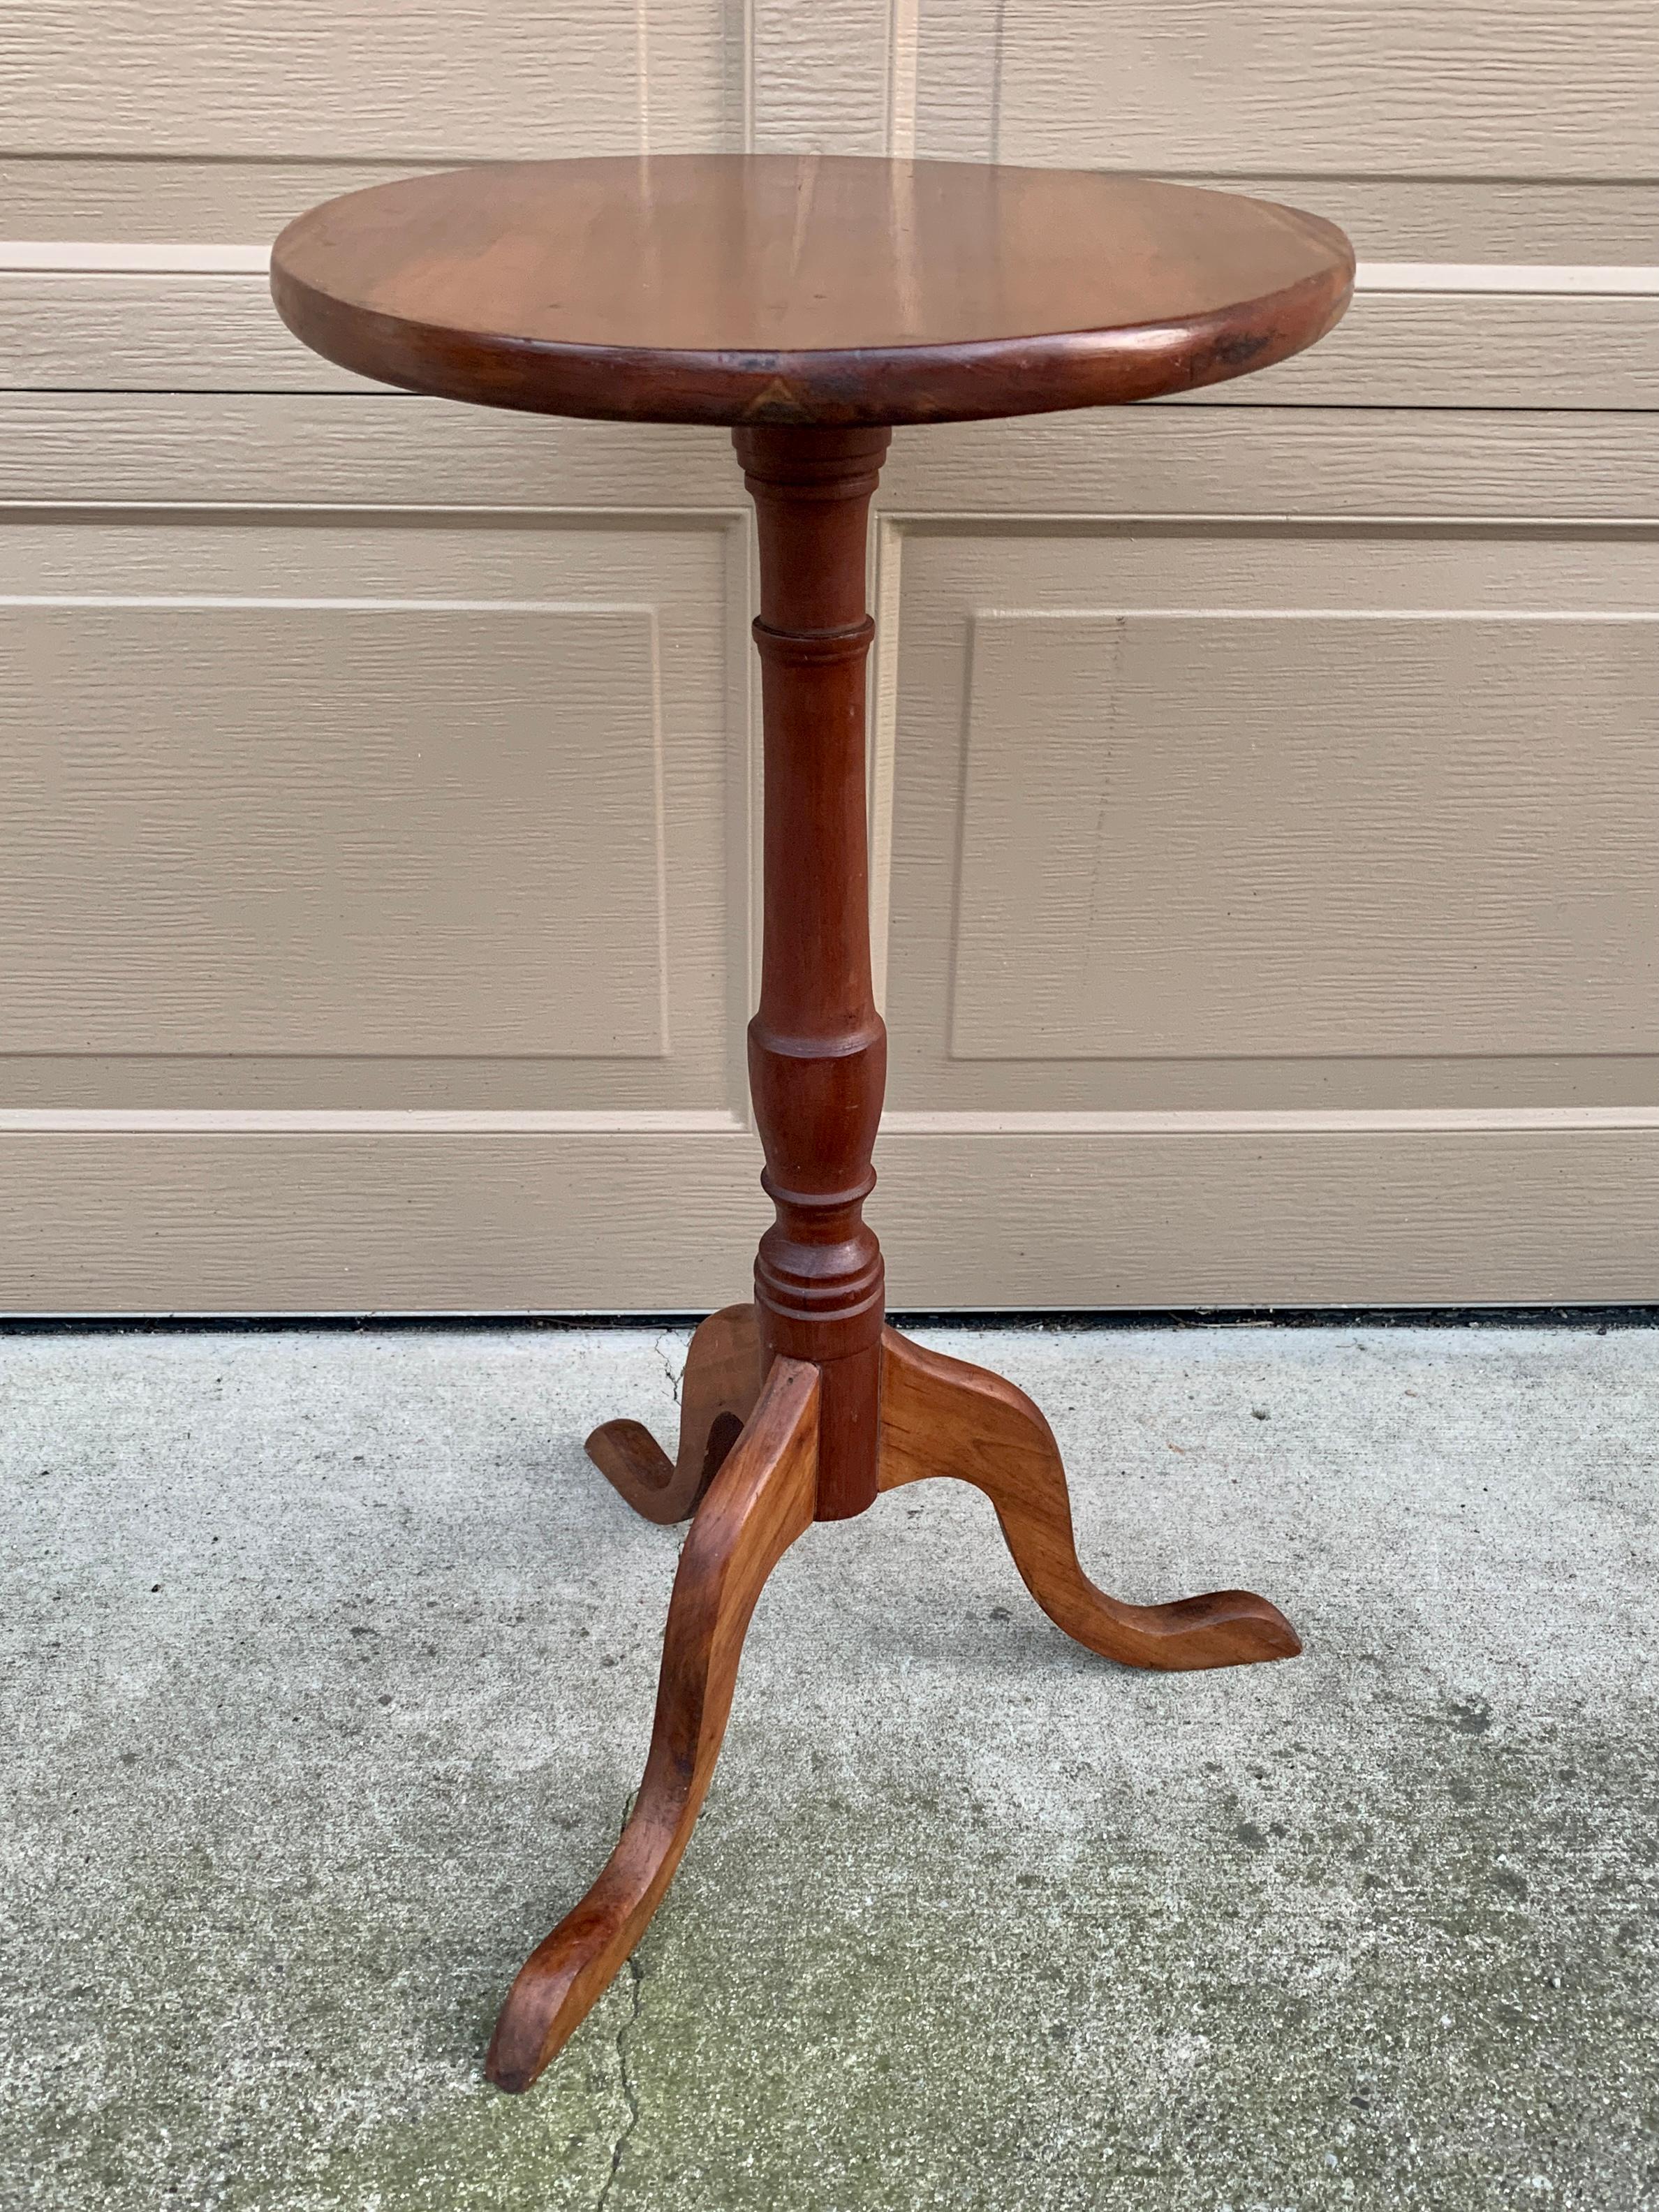 Antique American Colonial Cherry Candle Stand or Side Table, Mid 19th Century For Sale 5